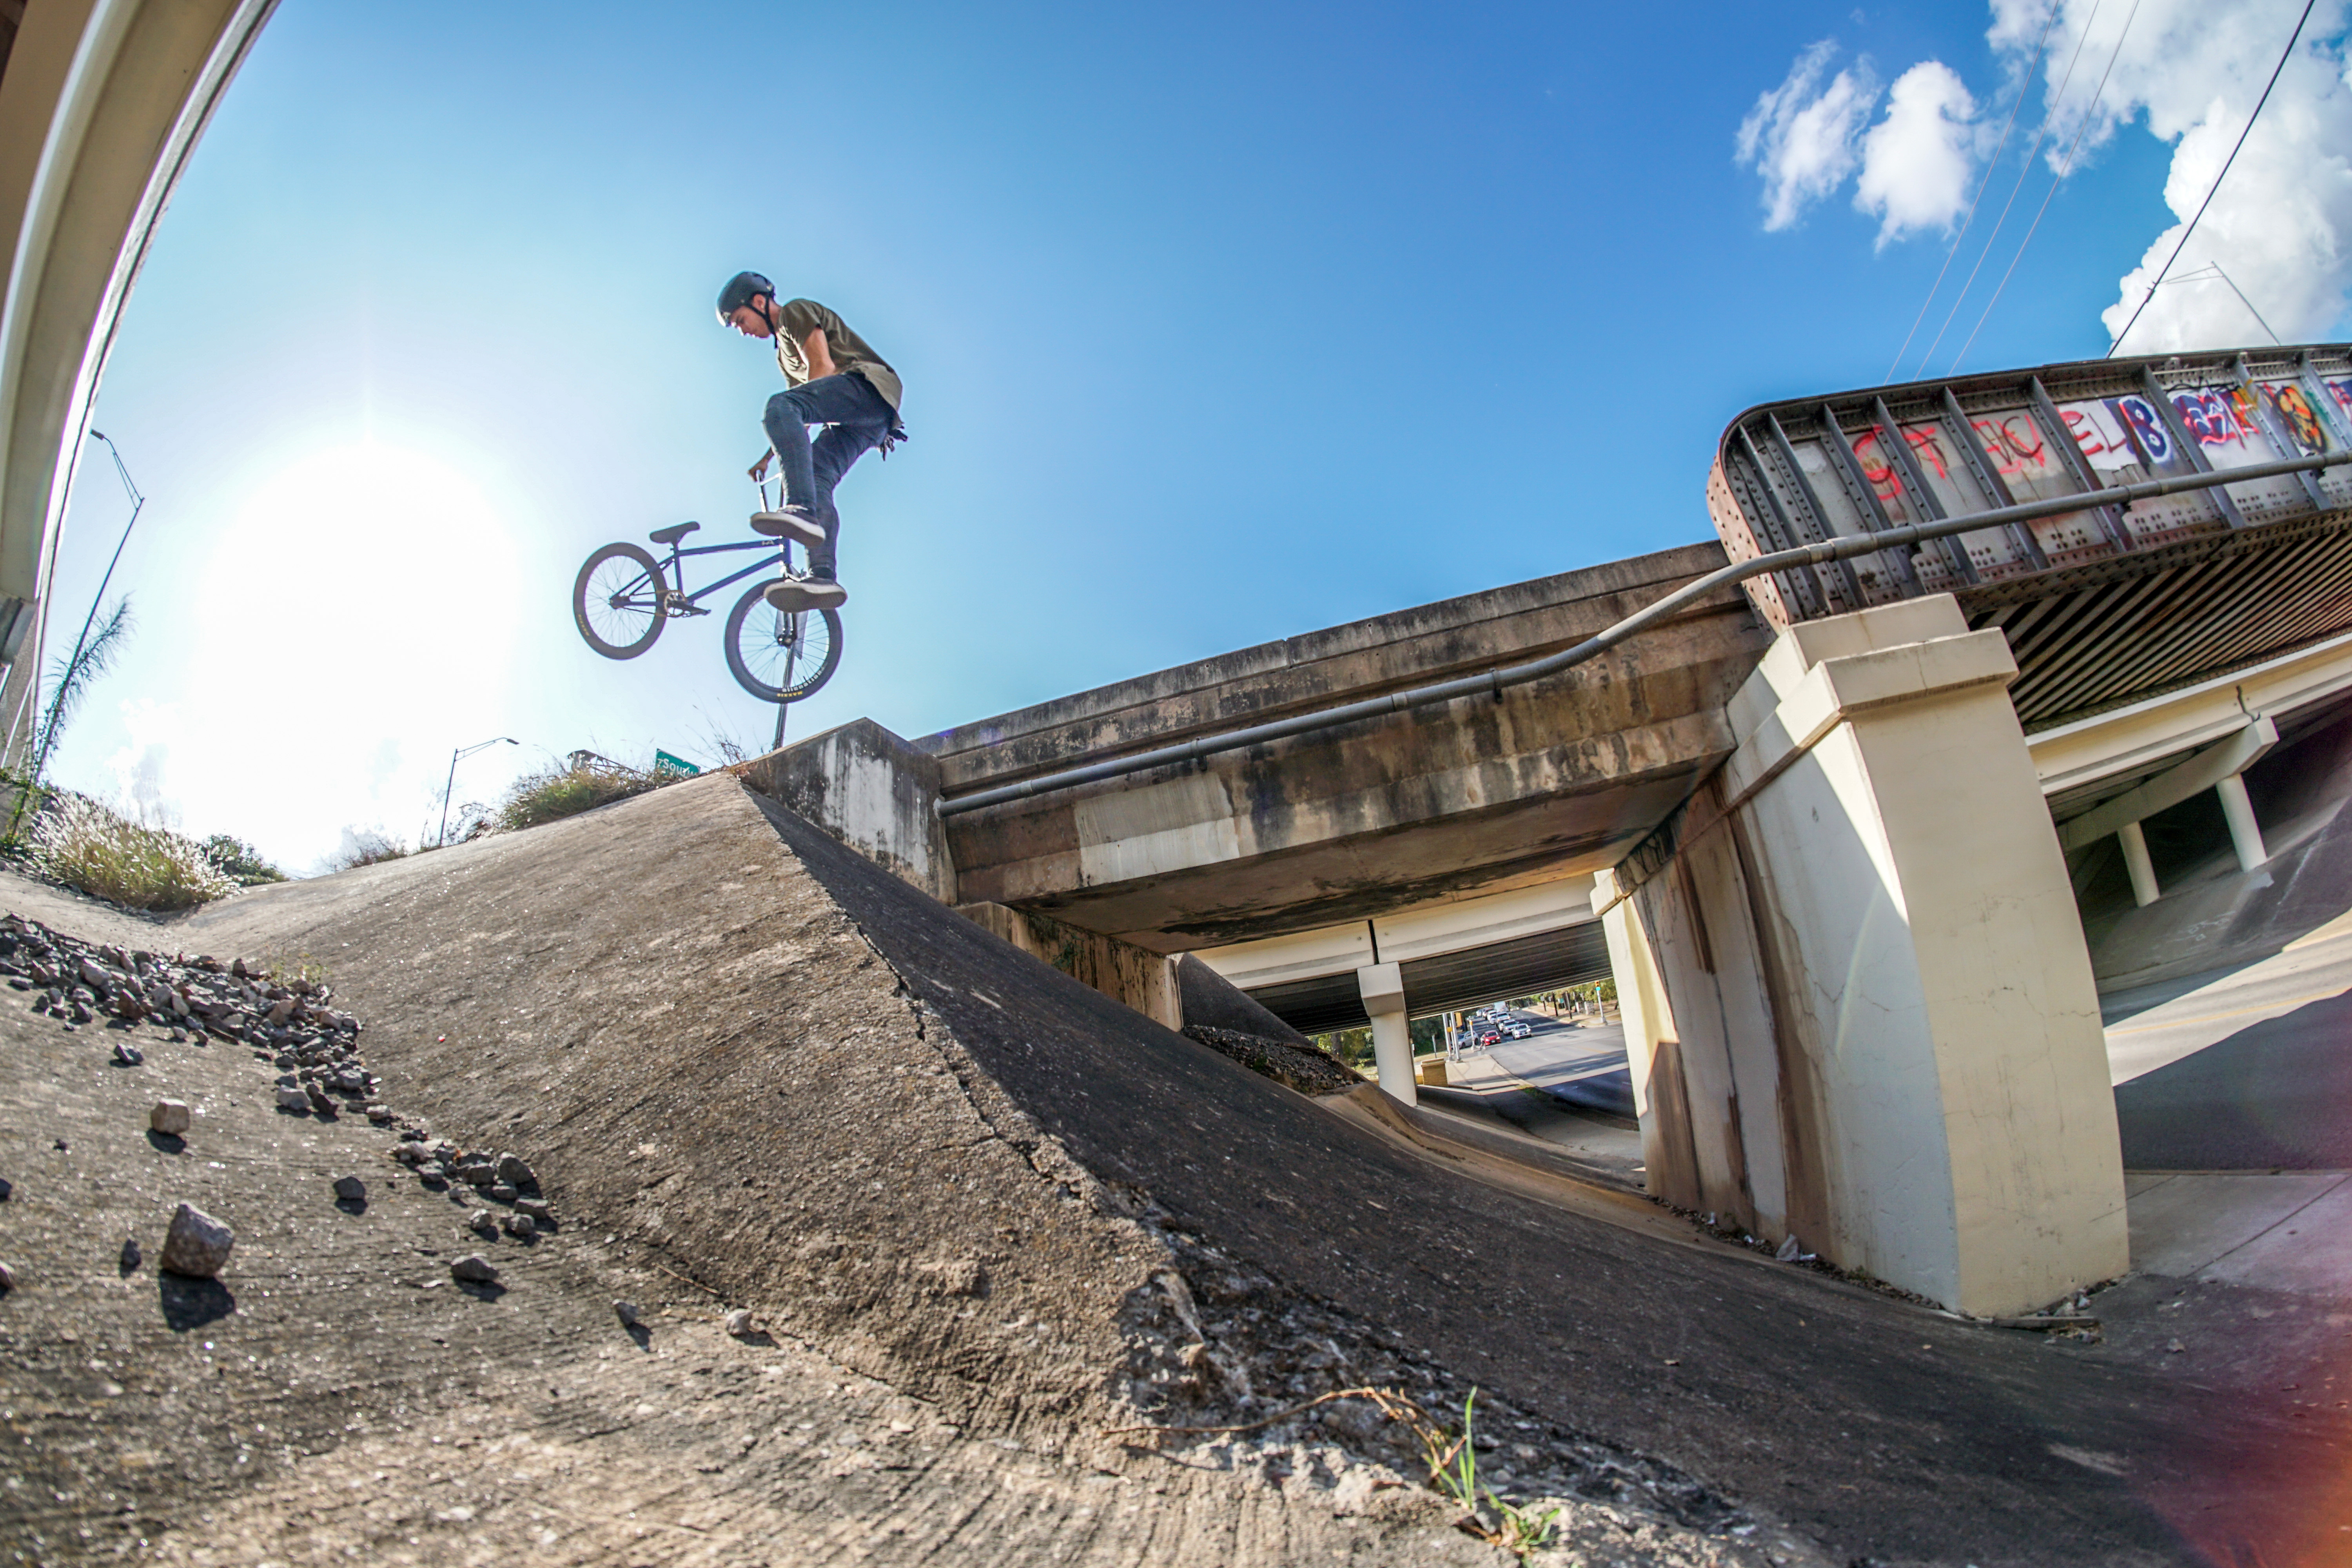 Free Agent rider Seth Riley hits the street of Austin,TX as the team headed out for a week of riding in the lone star state.